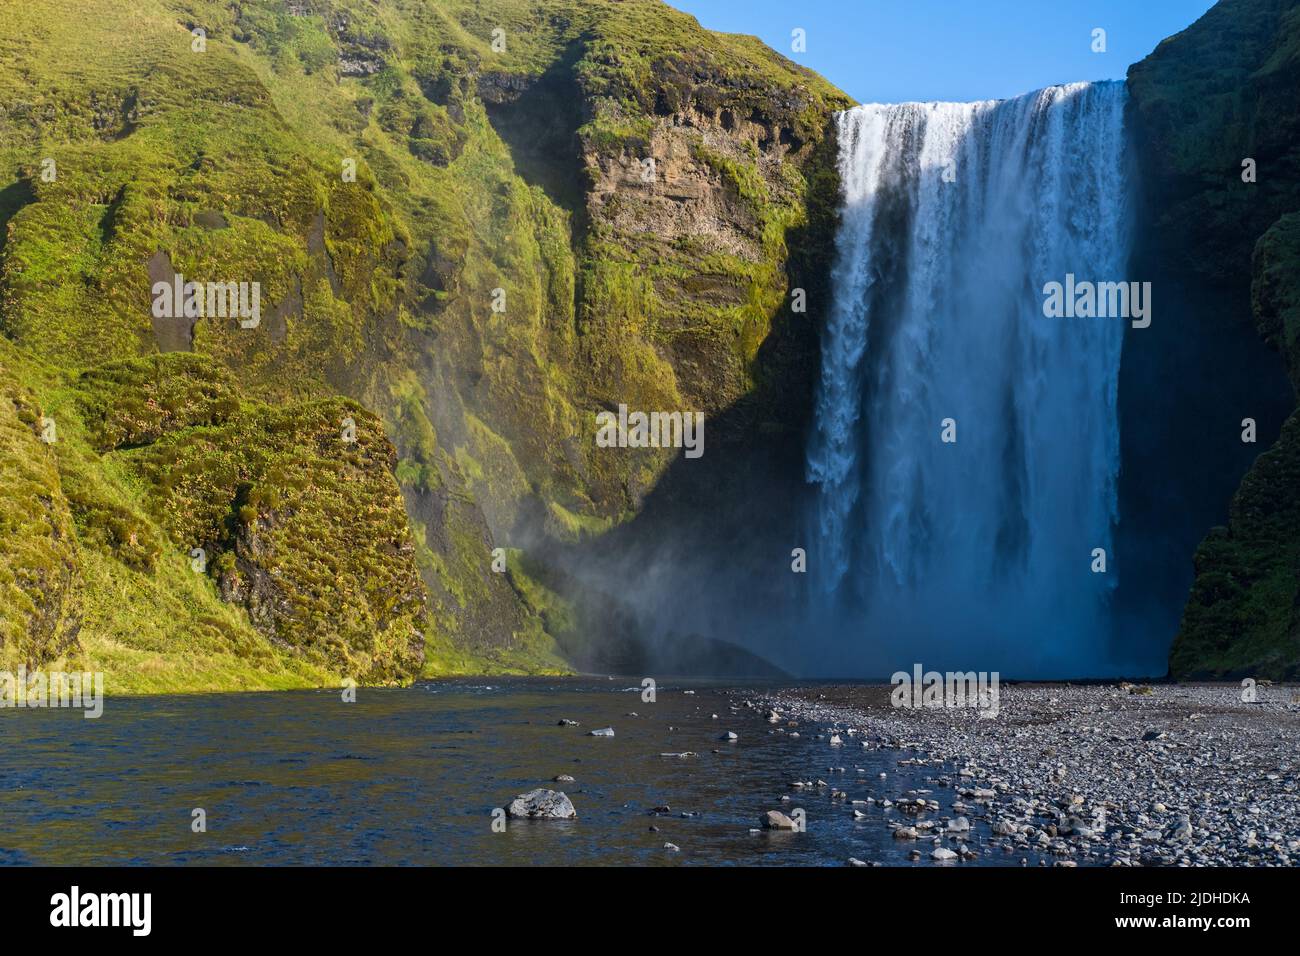 Picturesque full of water big waterfall Skogafoss autumn view, southwest Iceland. Stock Photo